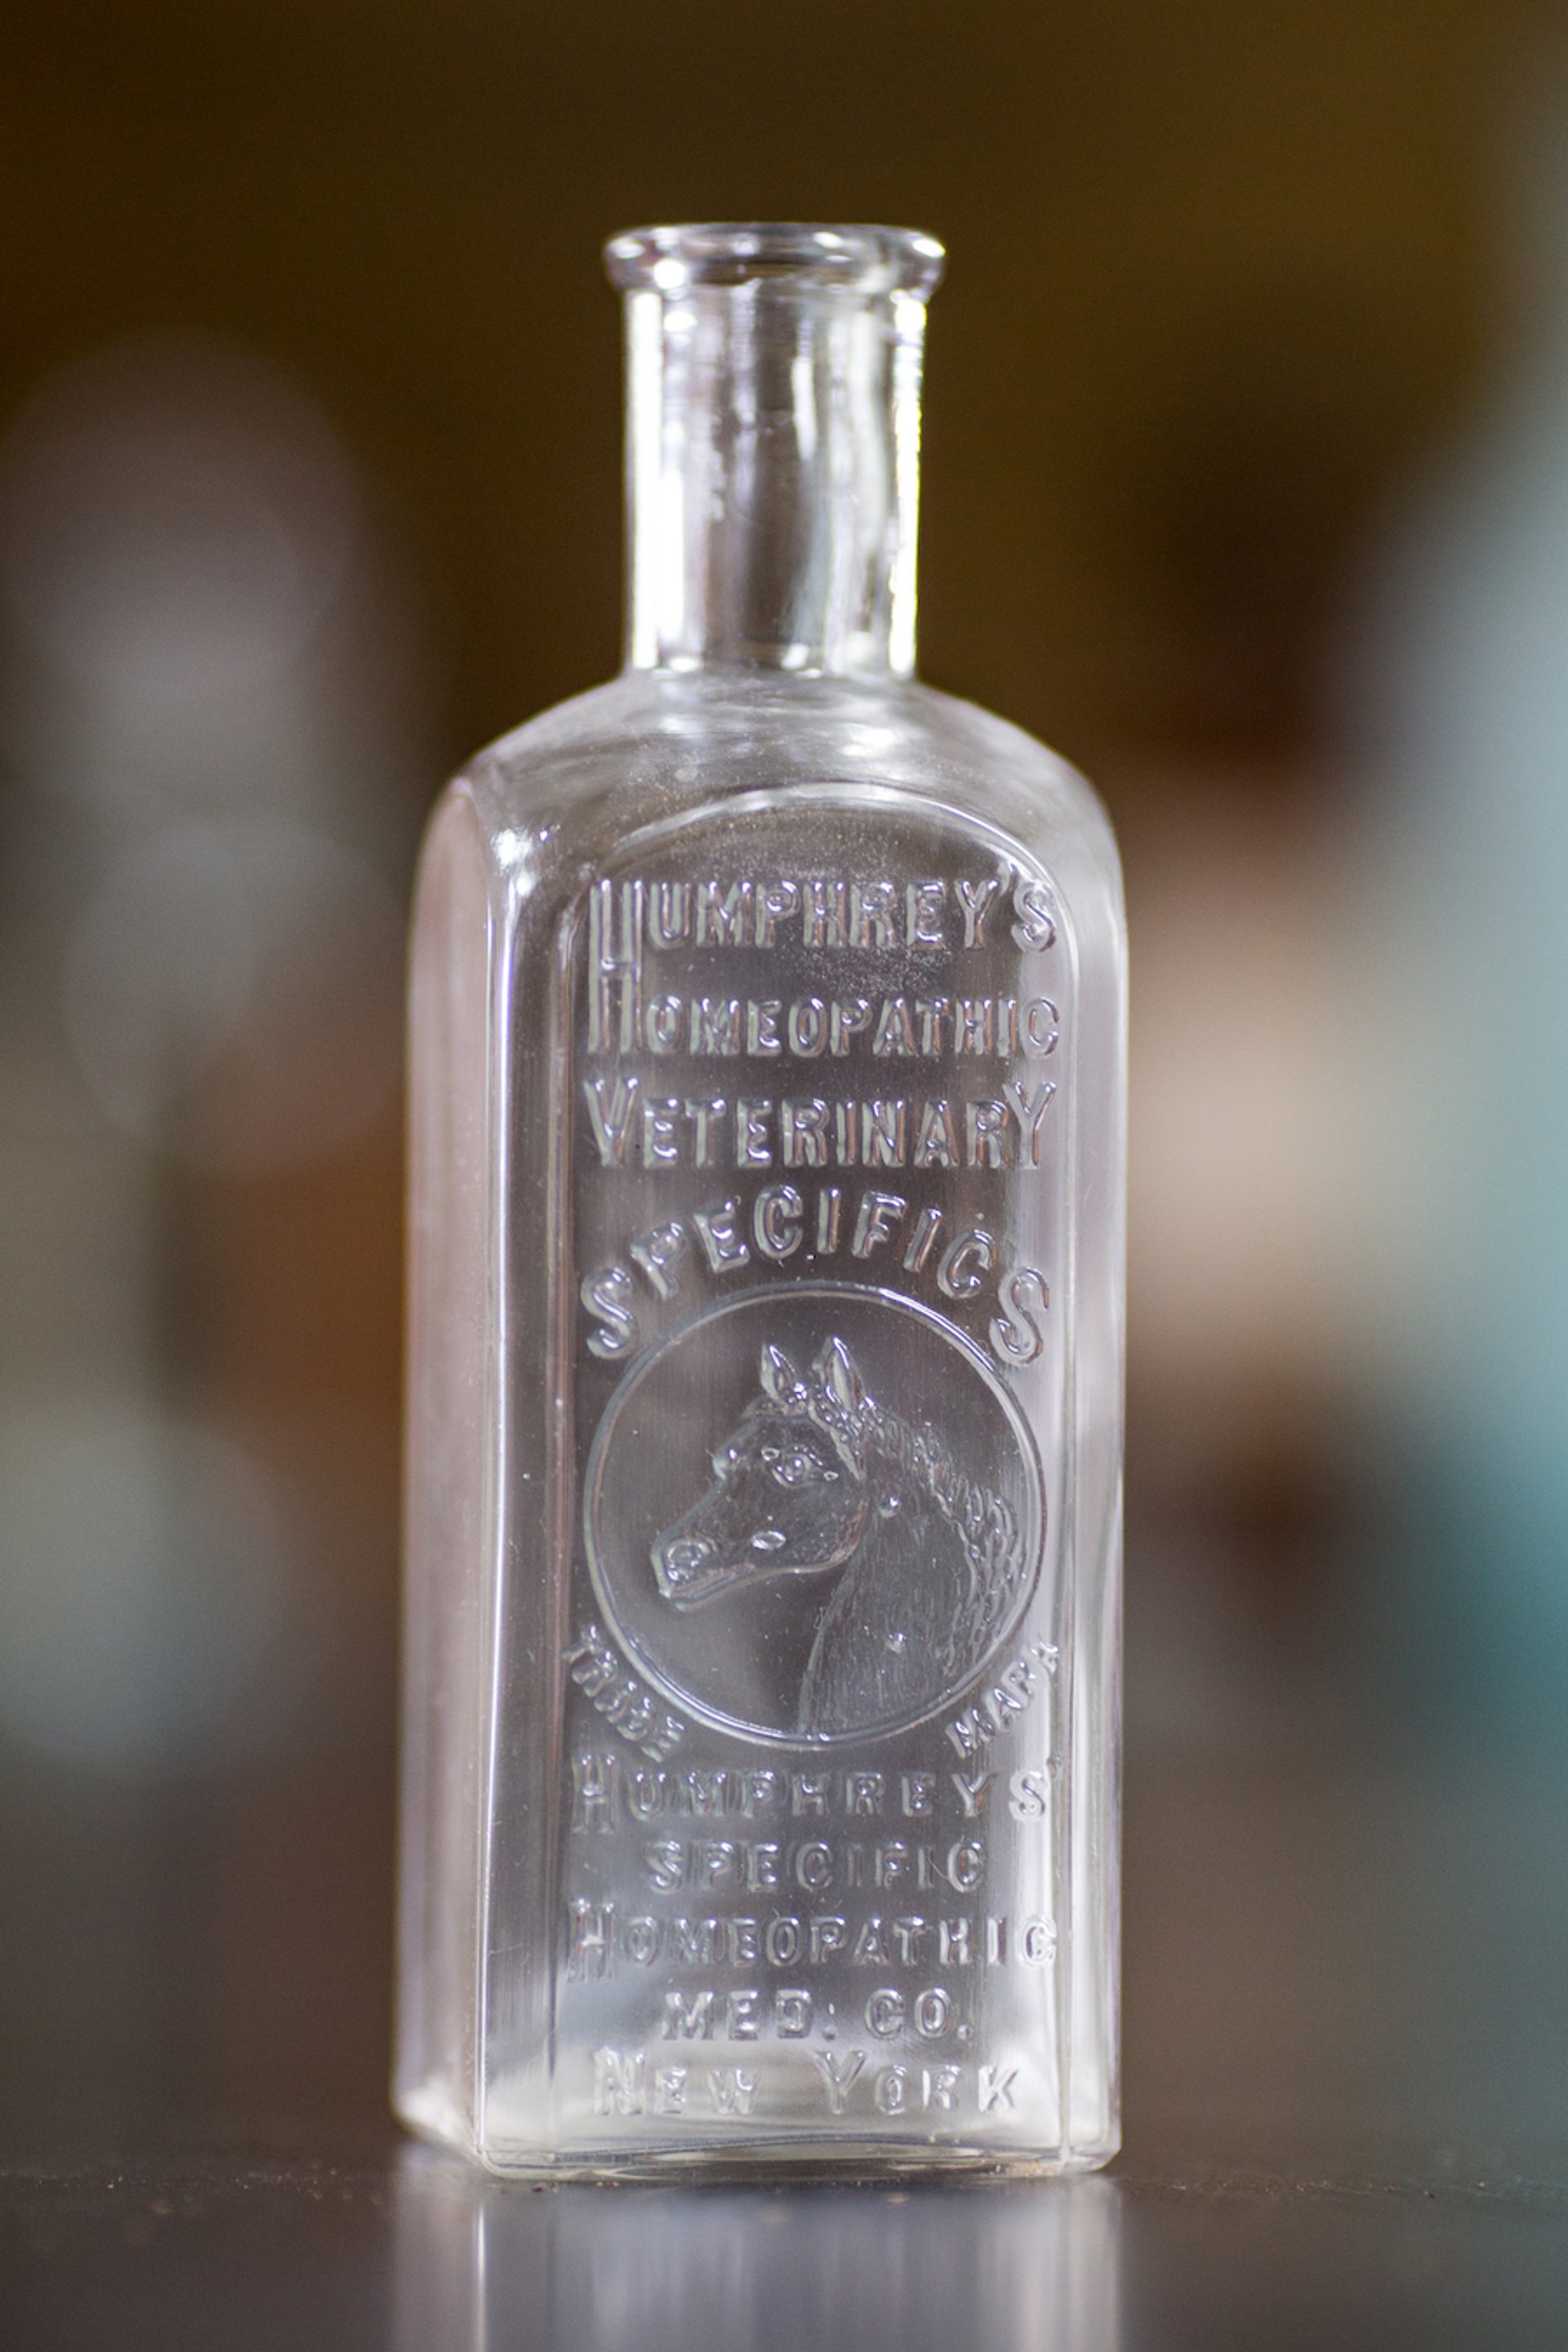 Humphrey’s Homeopathic Veterinary Specifics antique medicinal bottle, ca. 1860